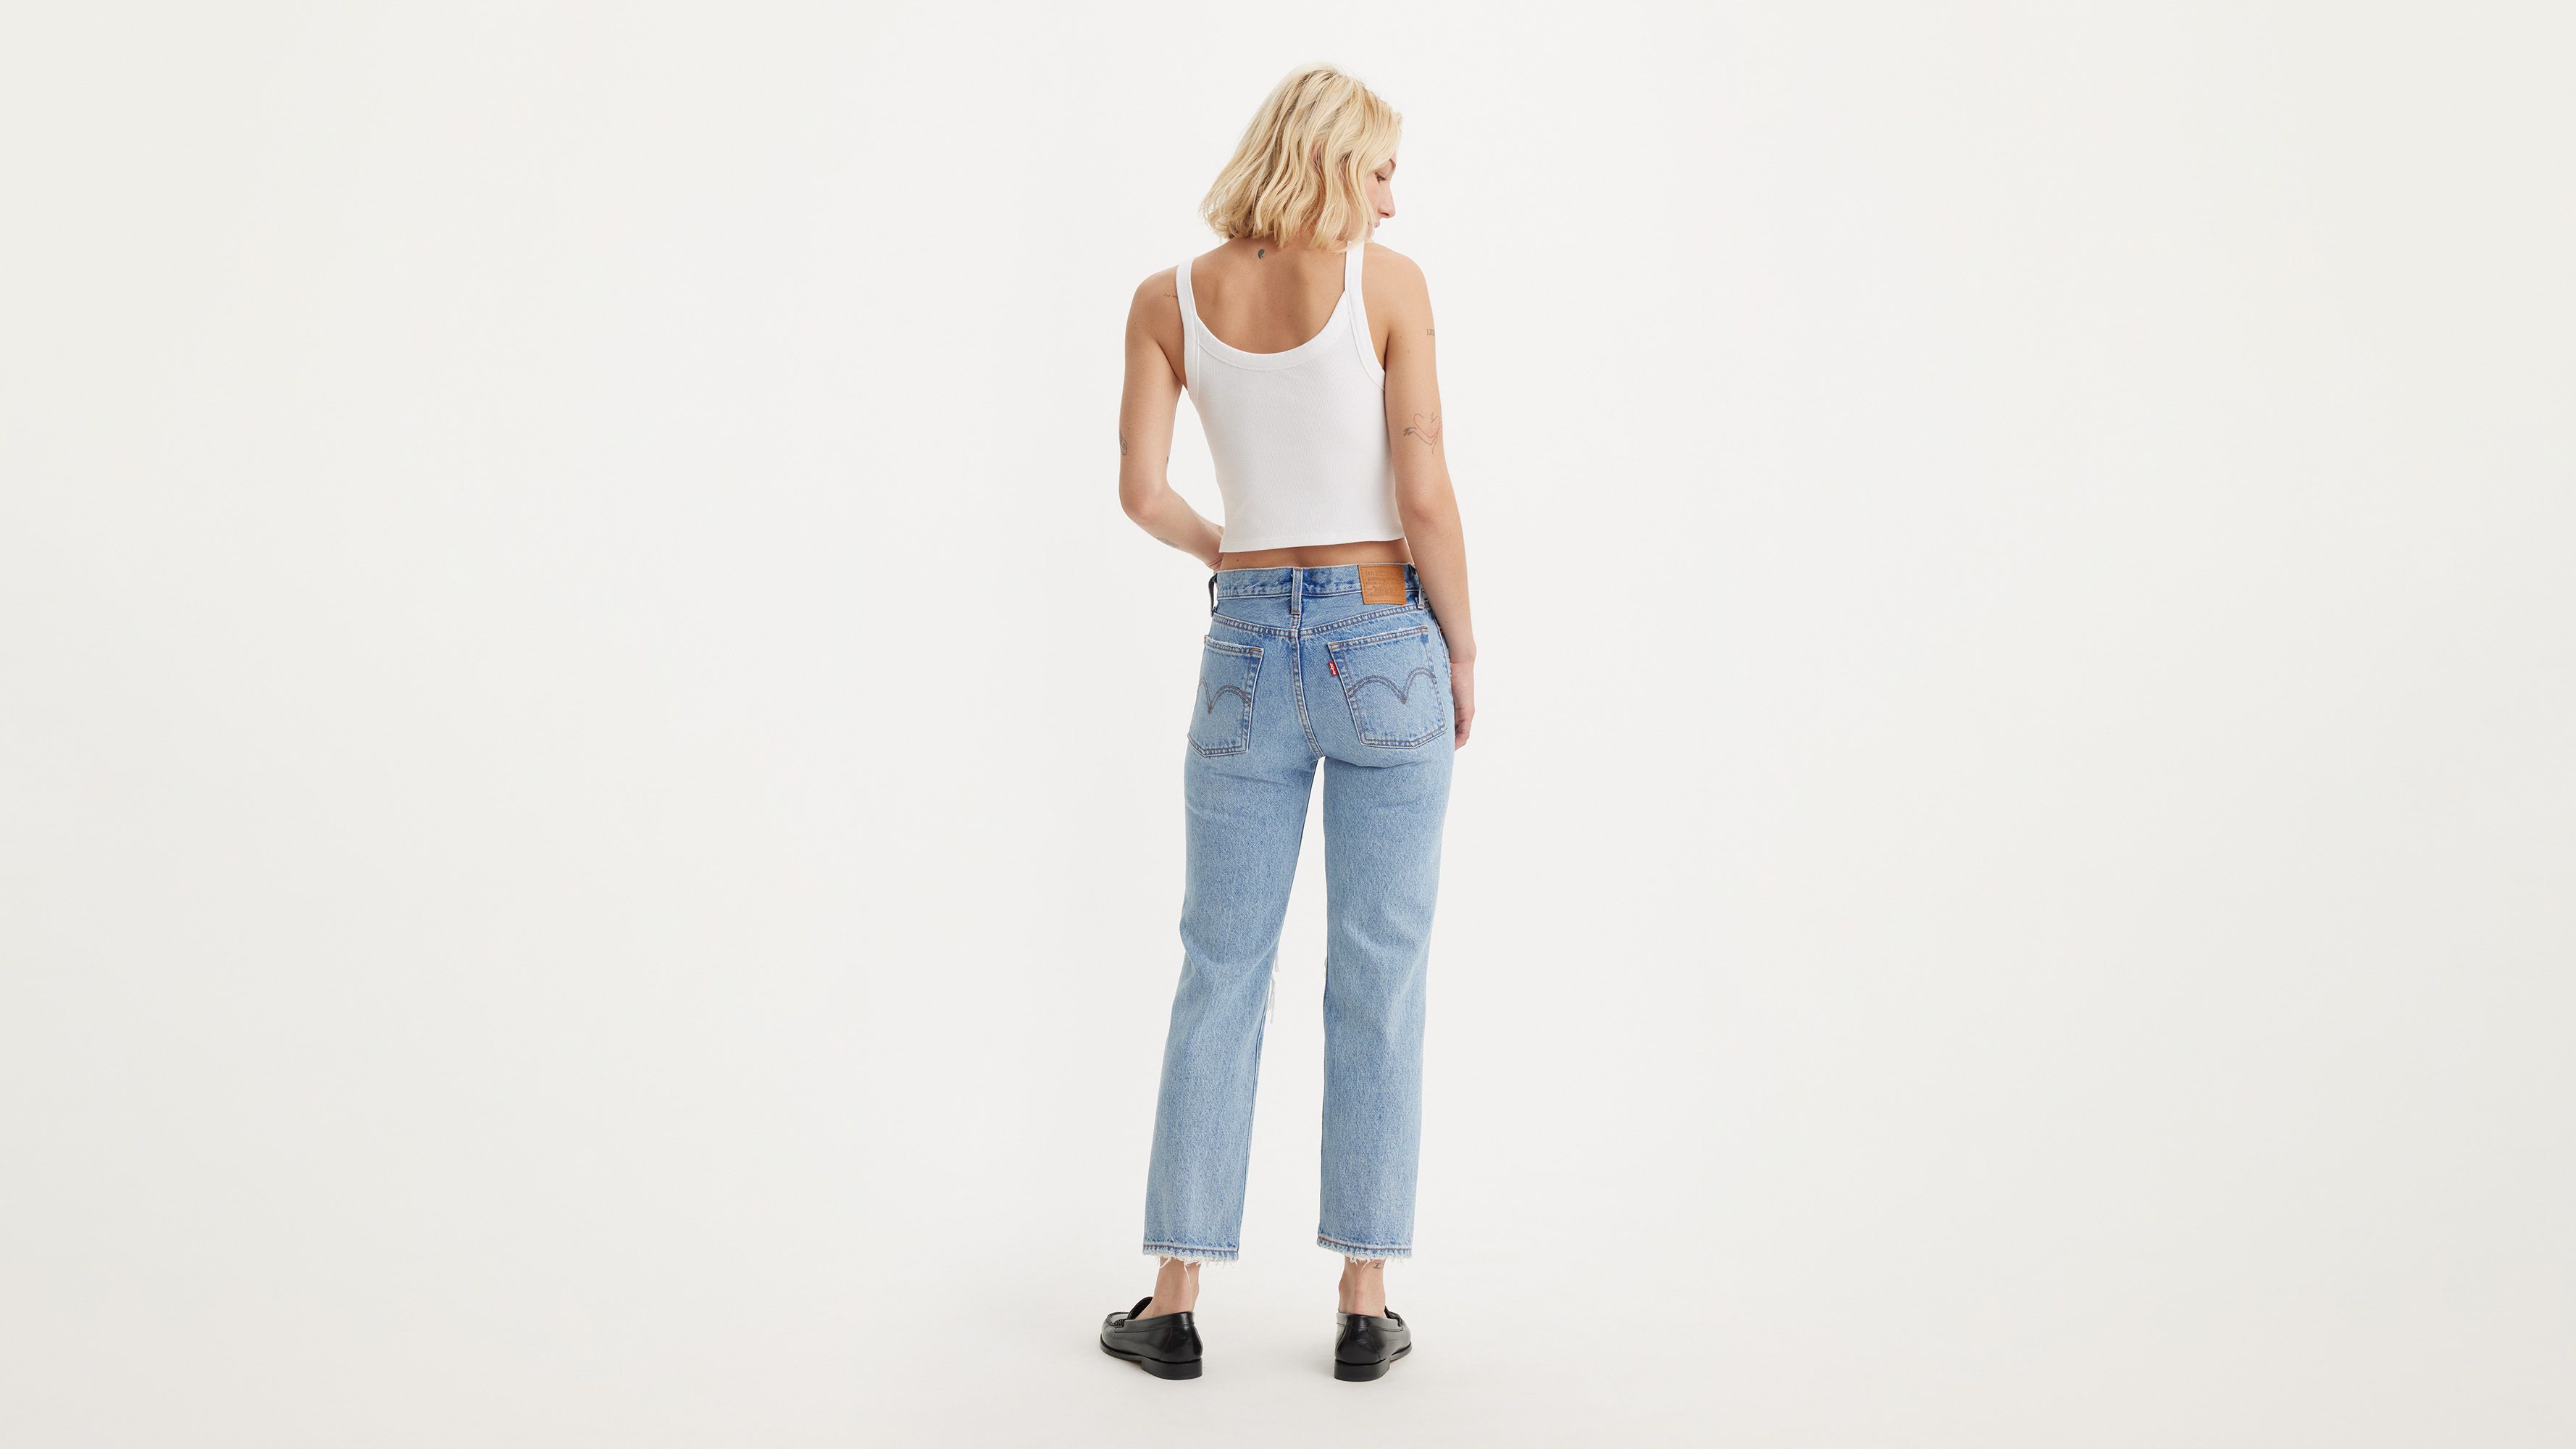 Levi's Wedgie Jeans Review: Just How Flattering Are They? - Chatelaine